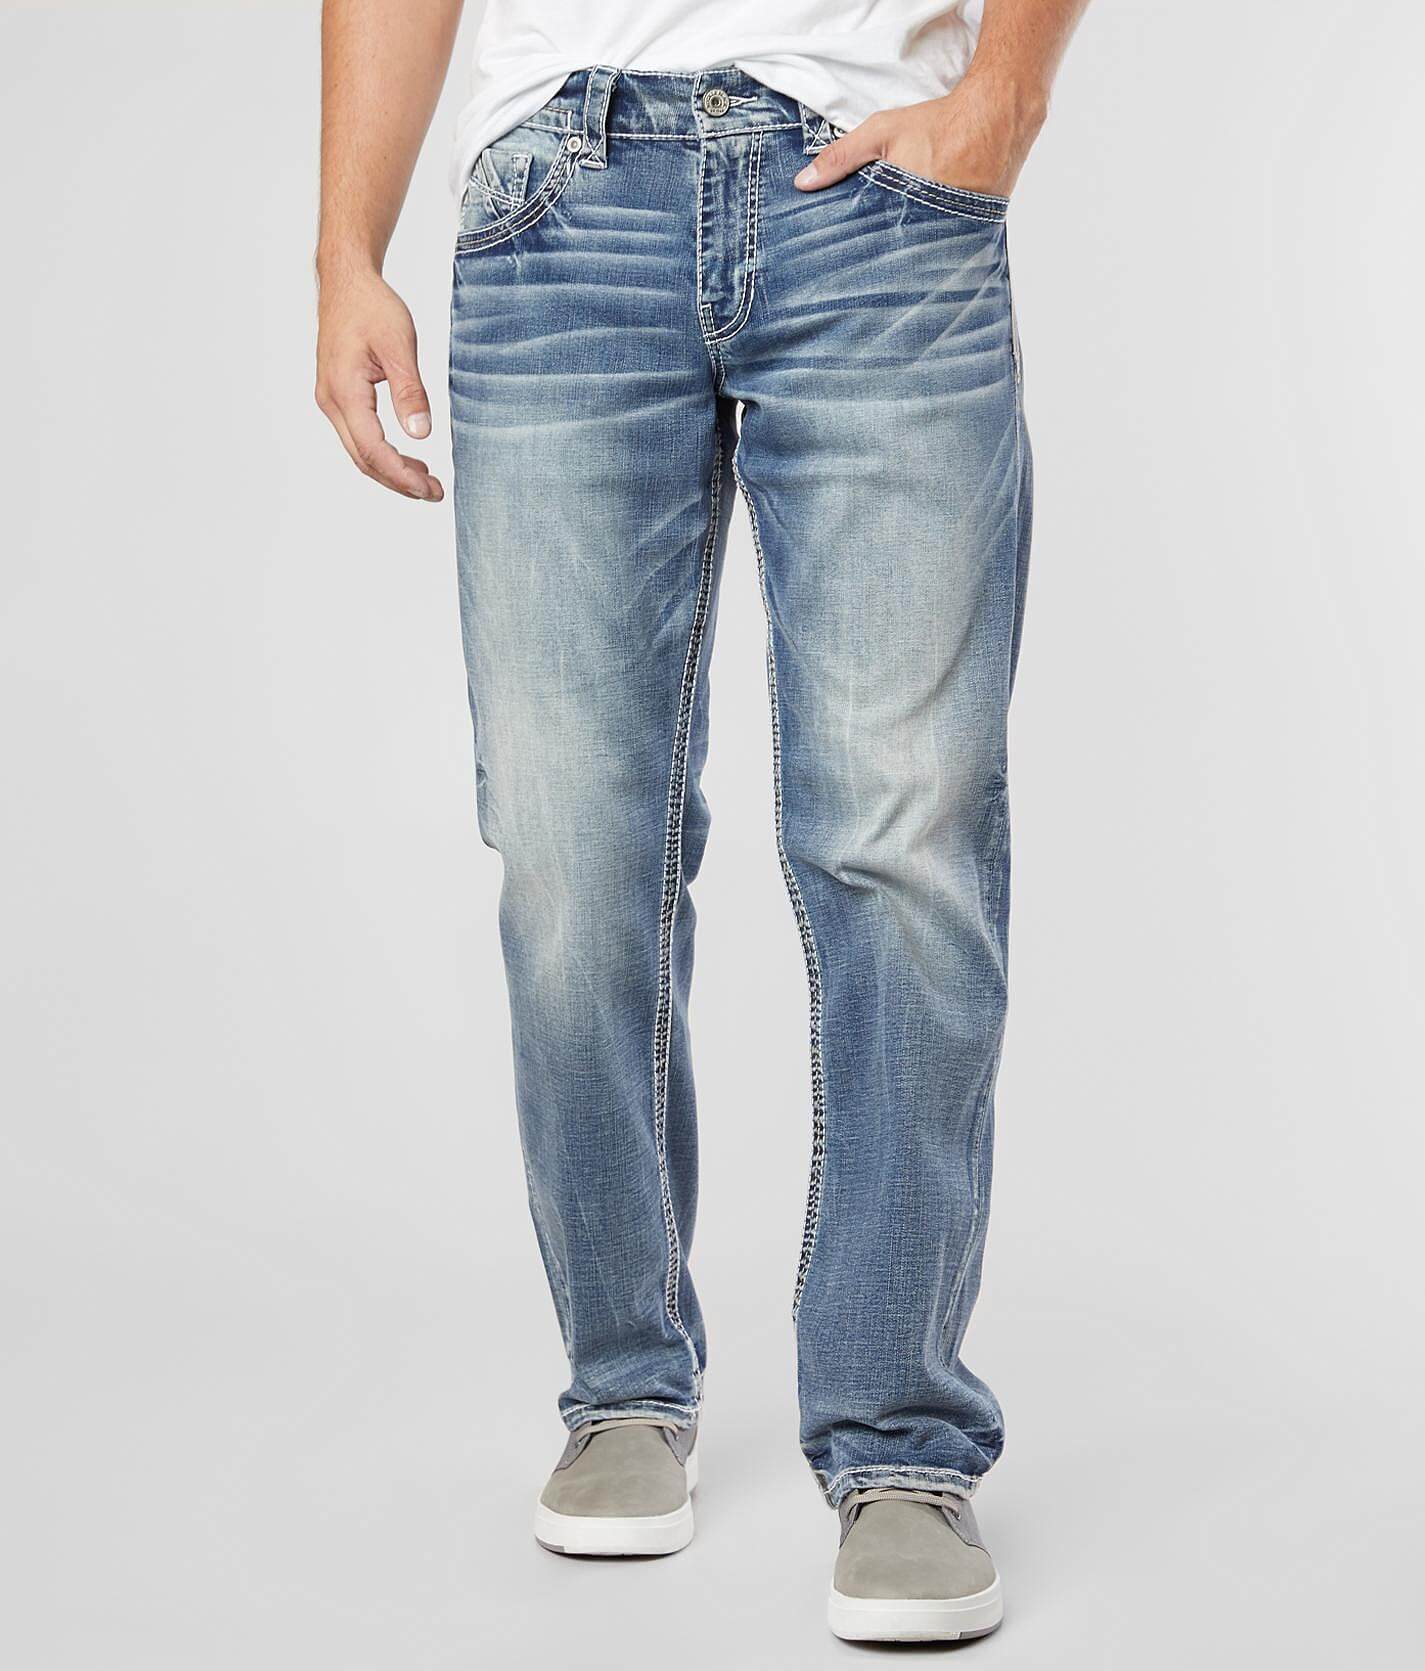 mens jeans from the buckle